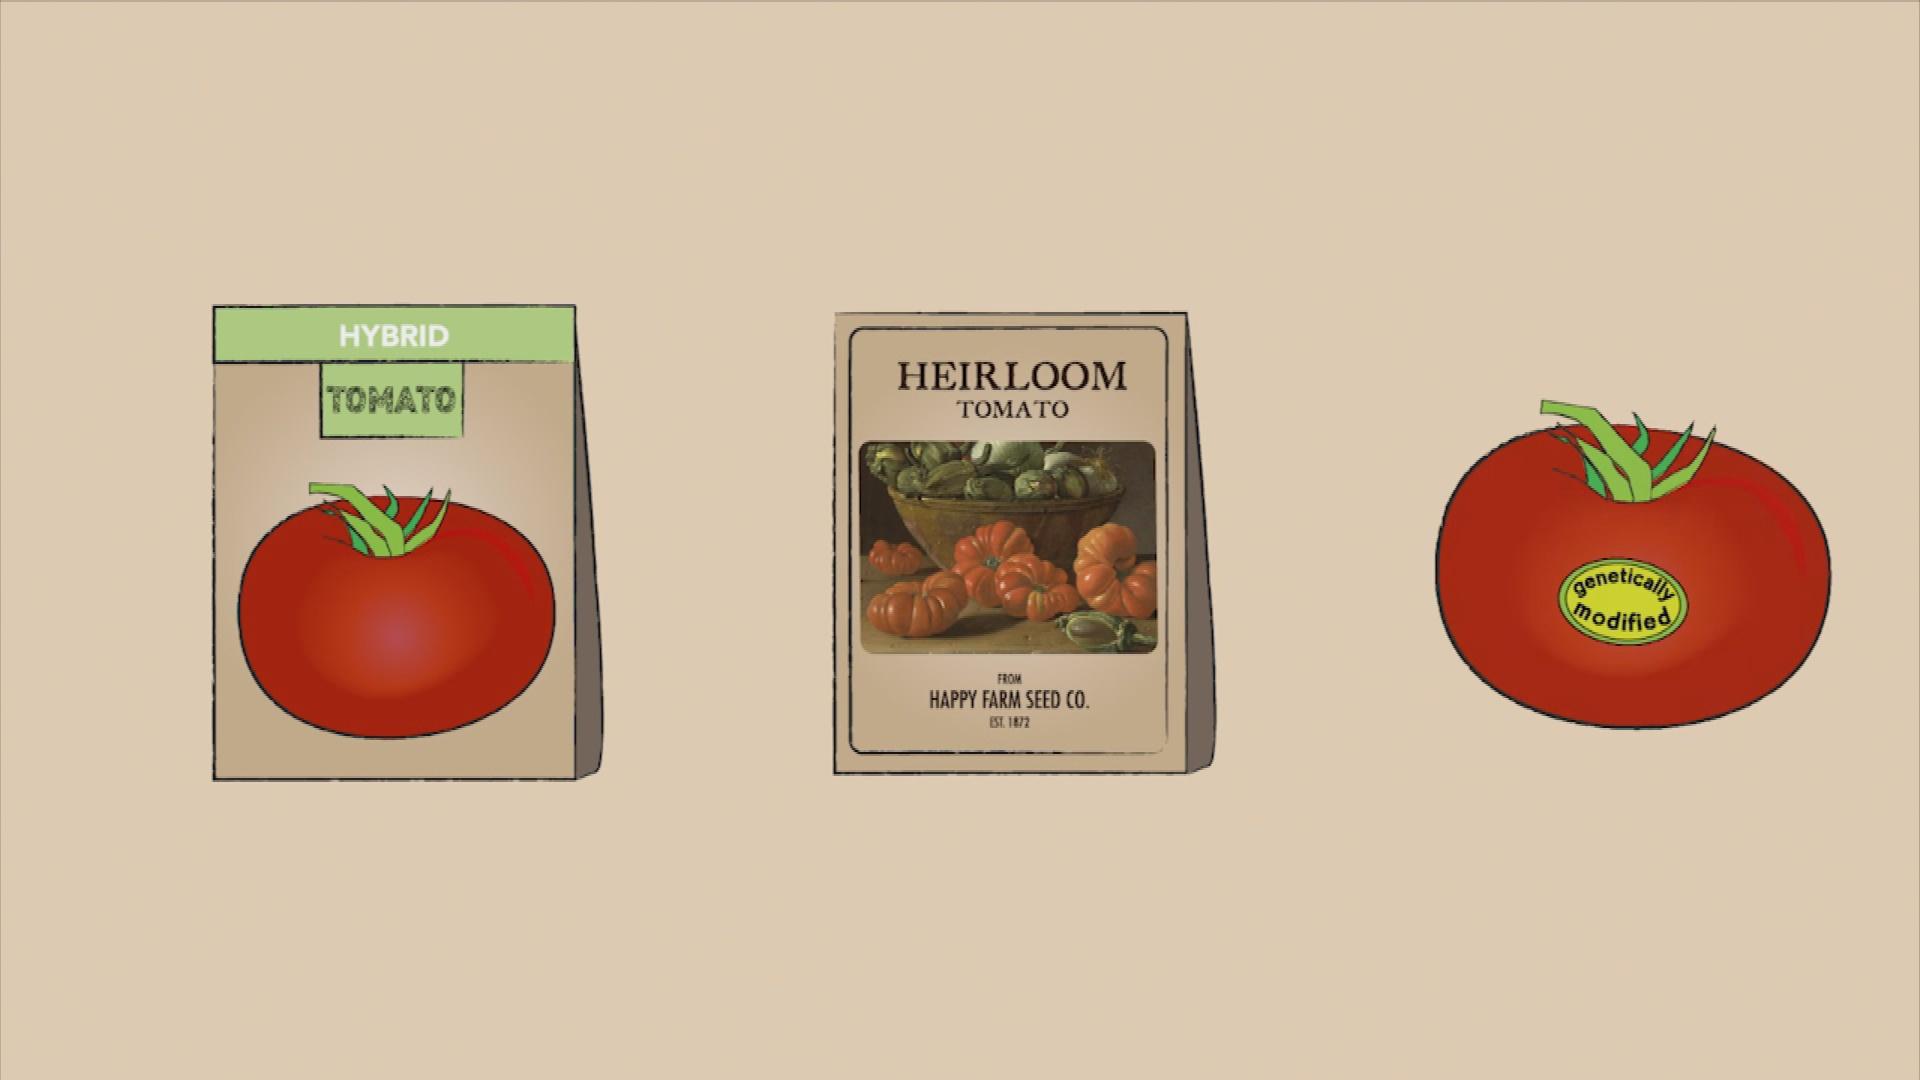 QUEST | What is an heirloom tomato, anyway? | PBS